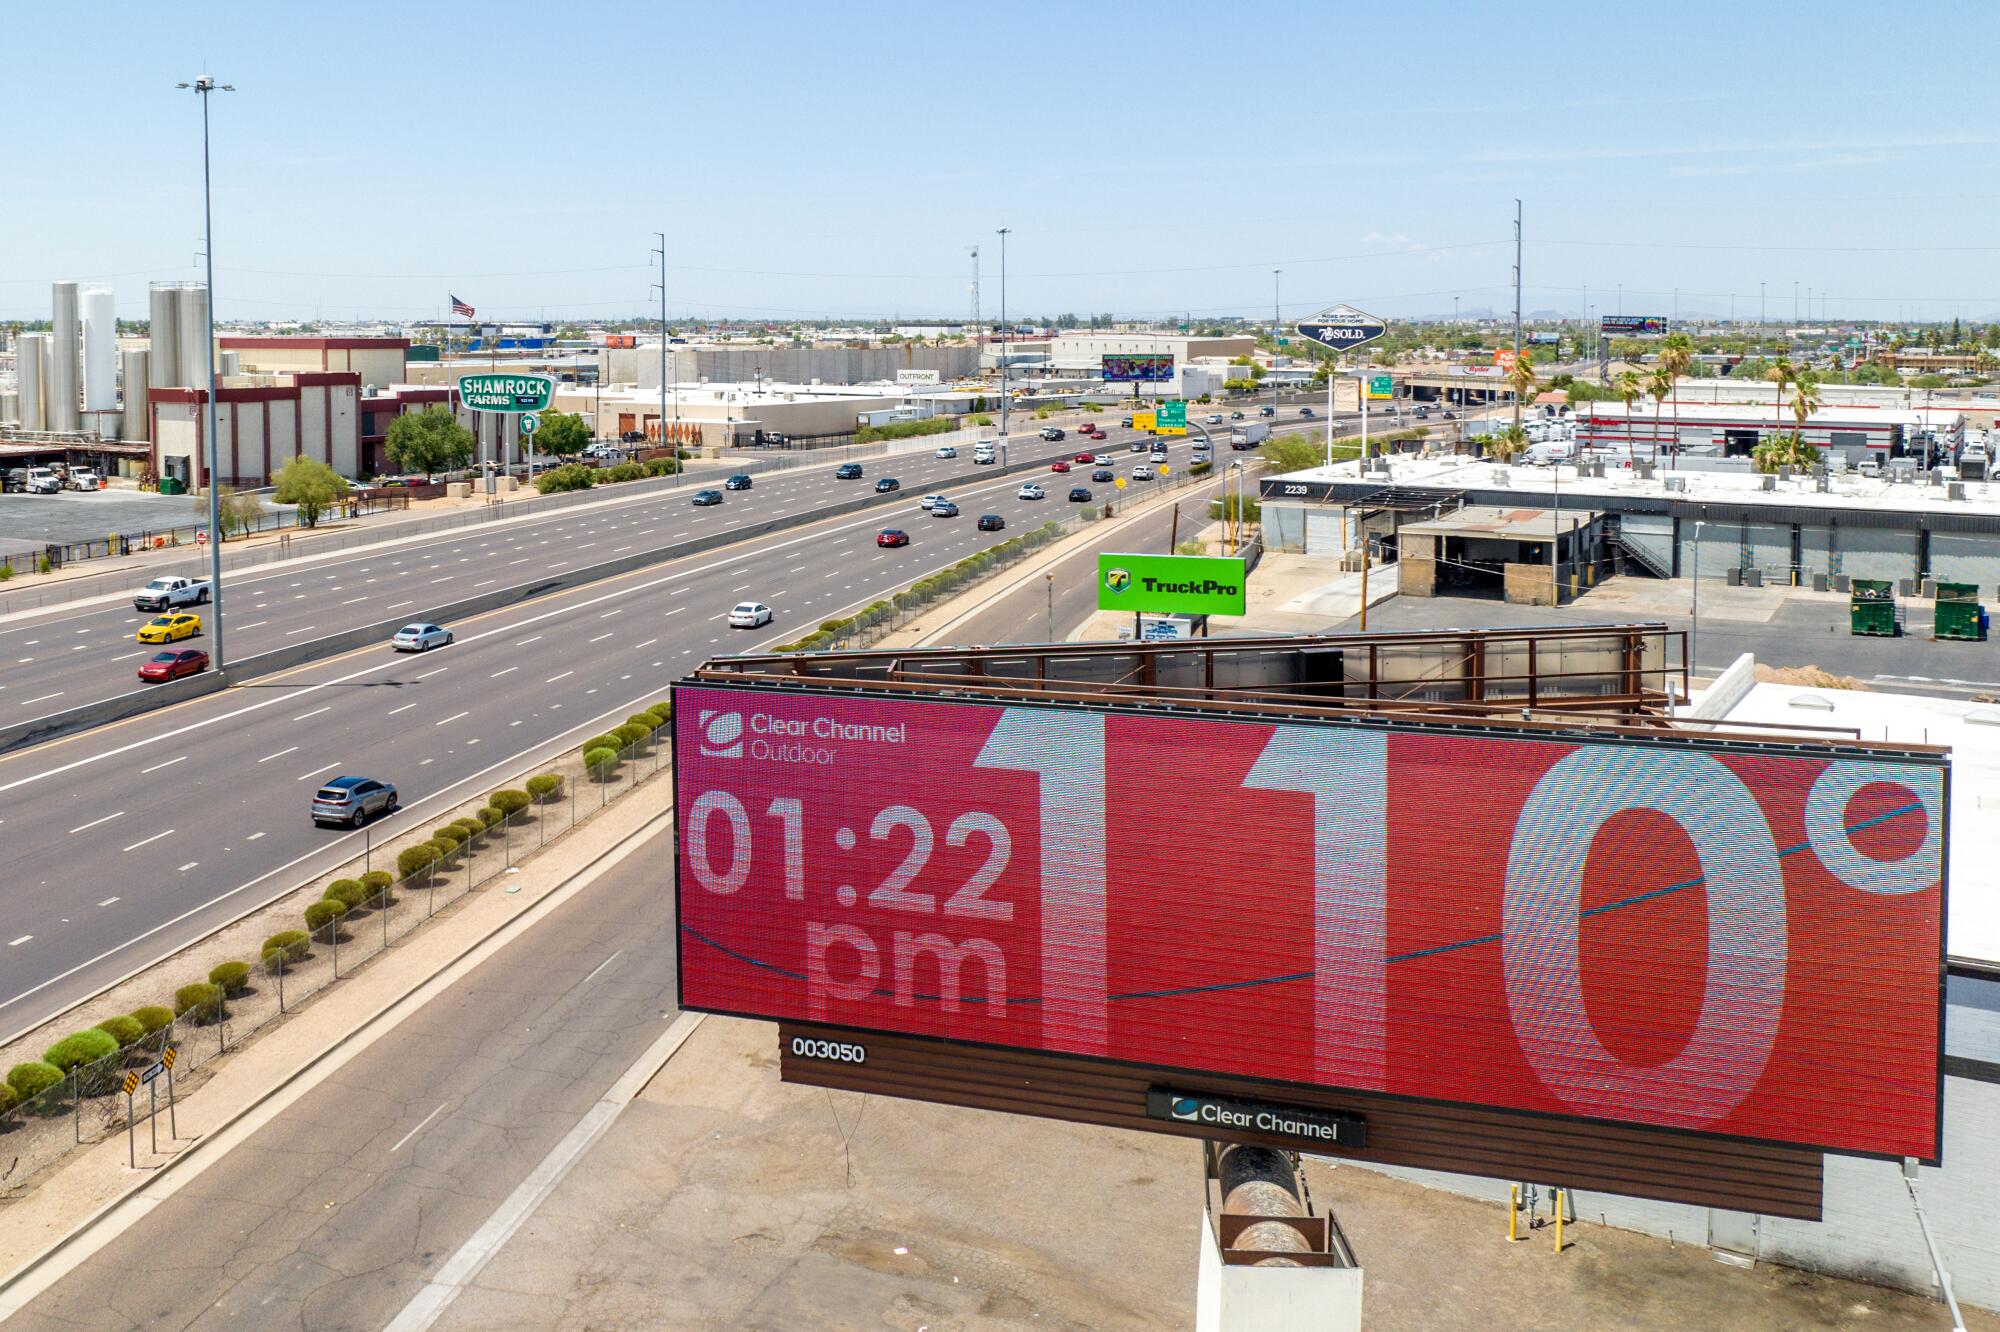 A view of a billboard in red, displaying time and temperature: 01:22 p.m. and 110 degrees 